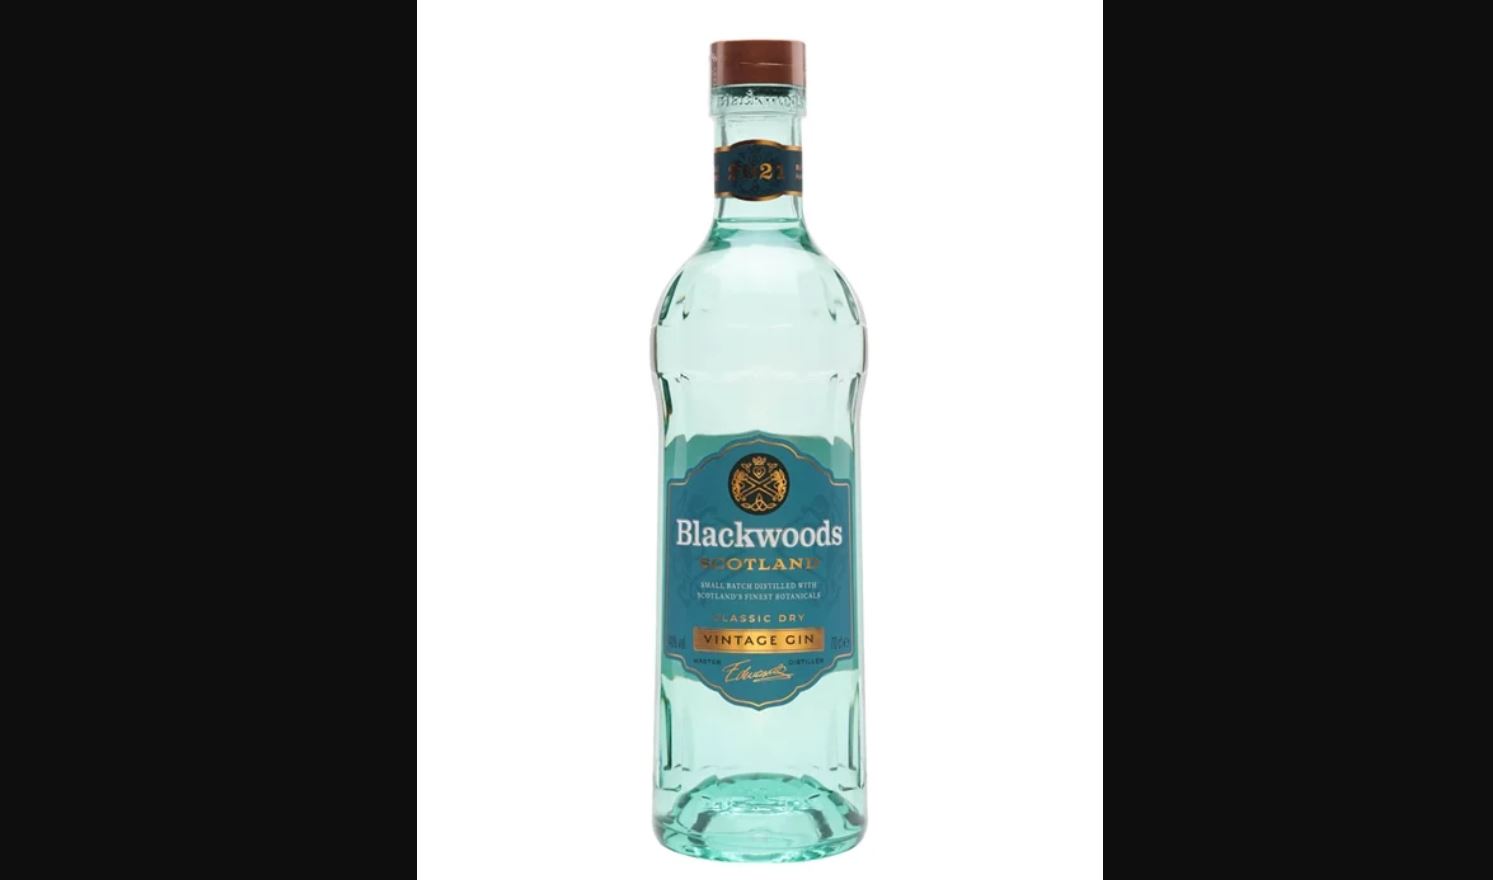 Blackwoods Classic Dry Vintage Gin